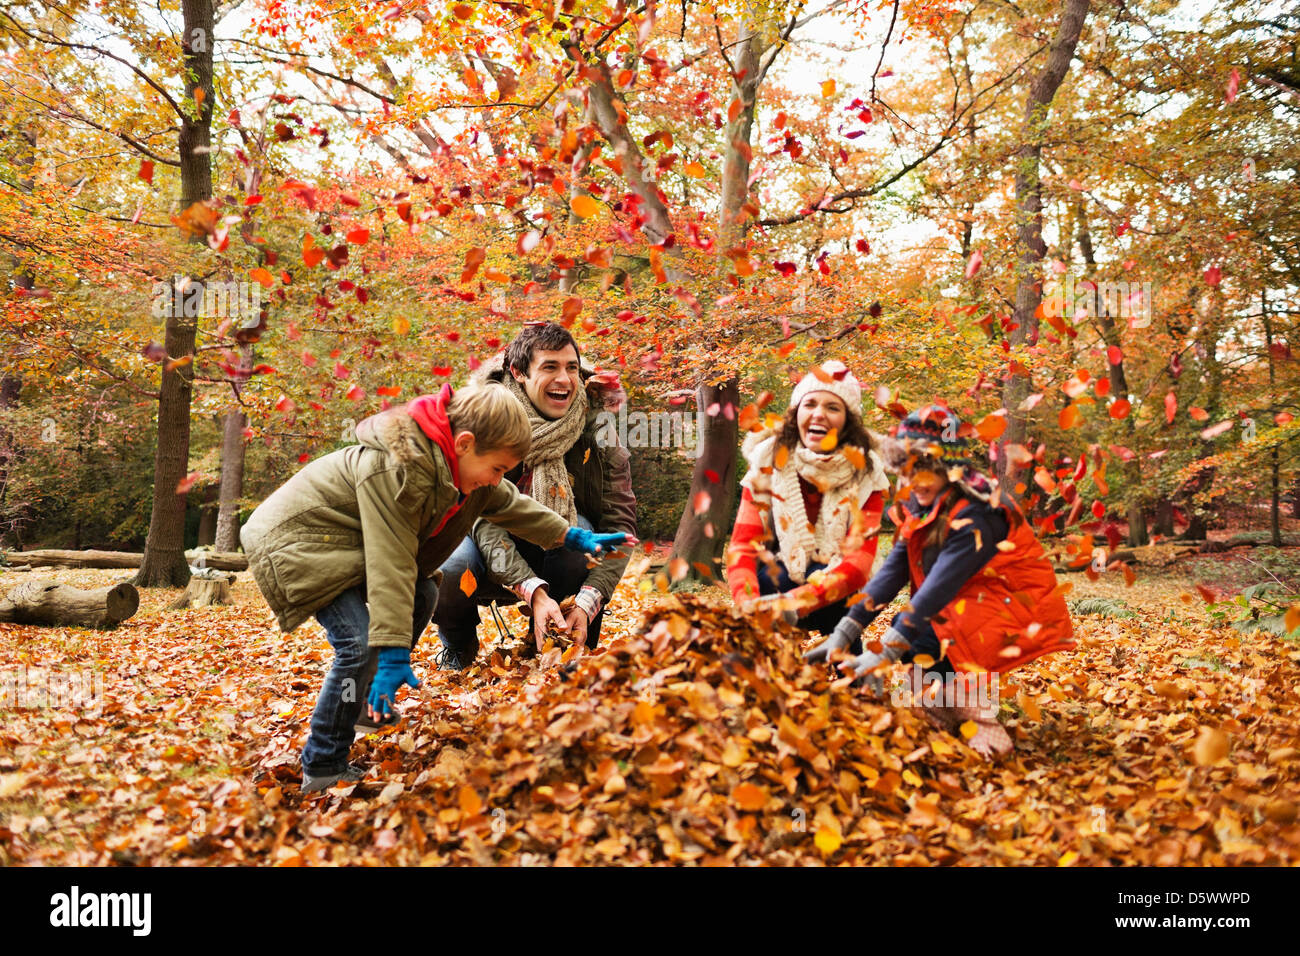 Family playing in autumn leaves Stock Photo